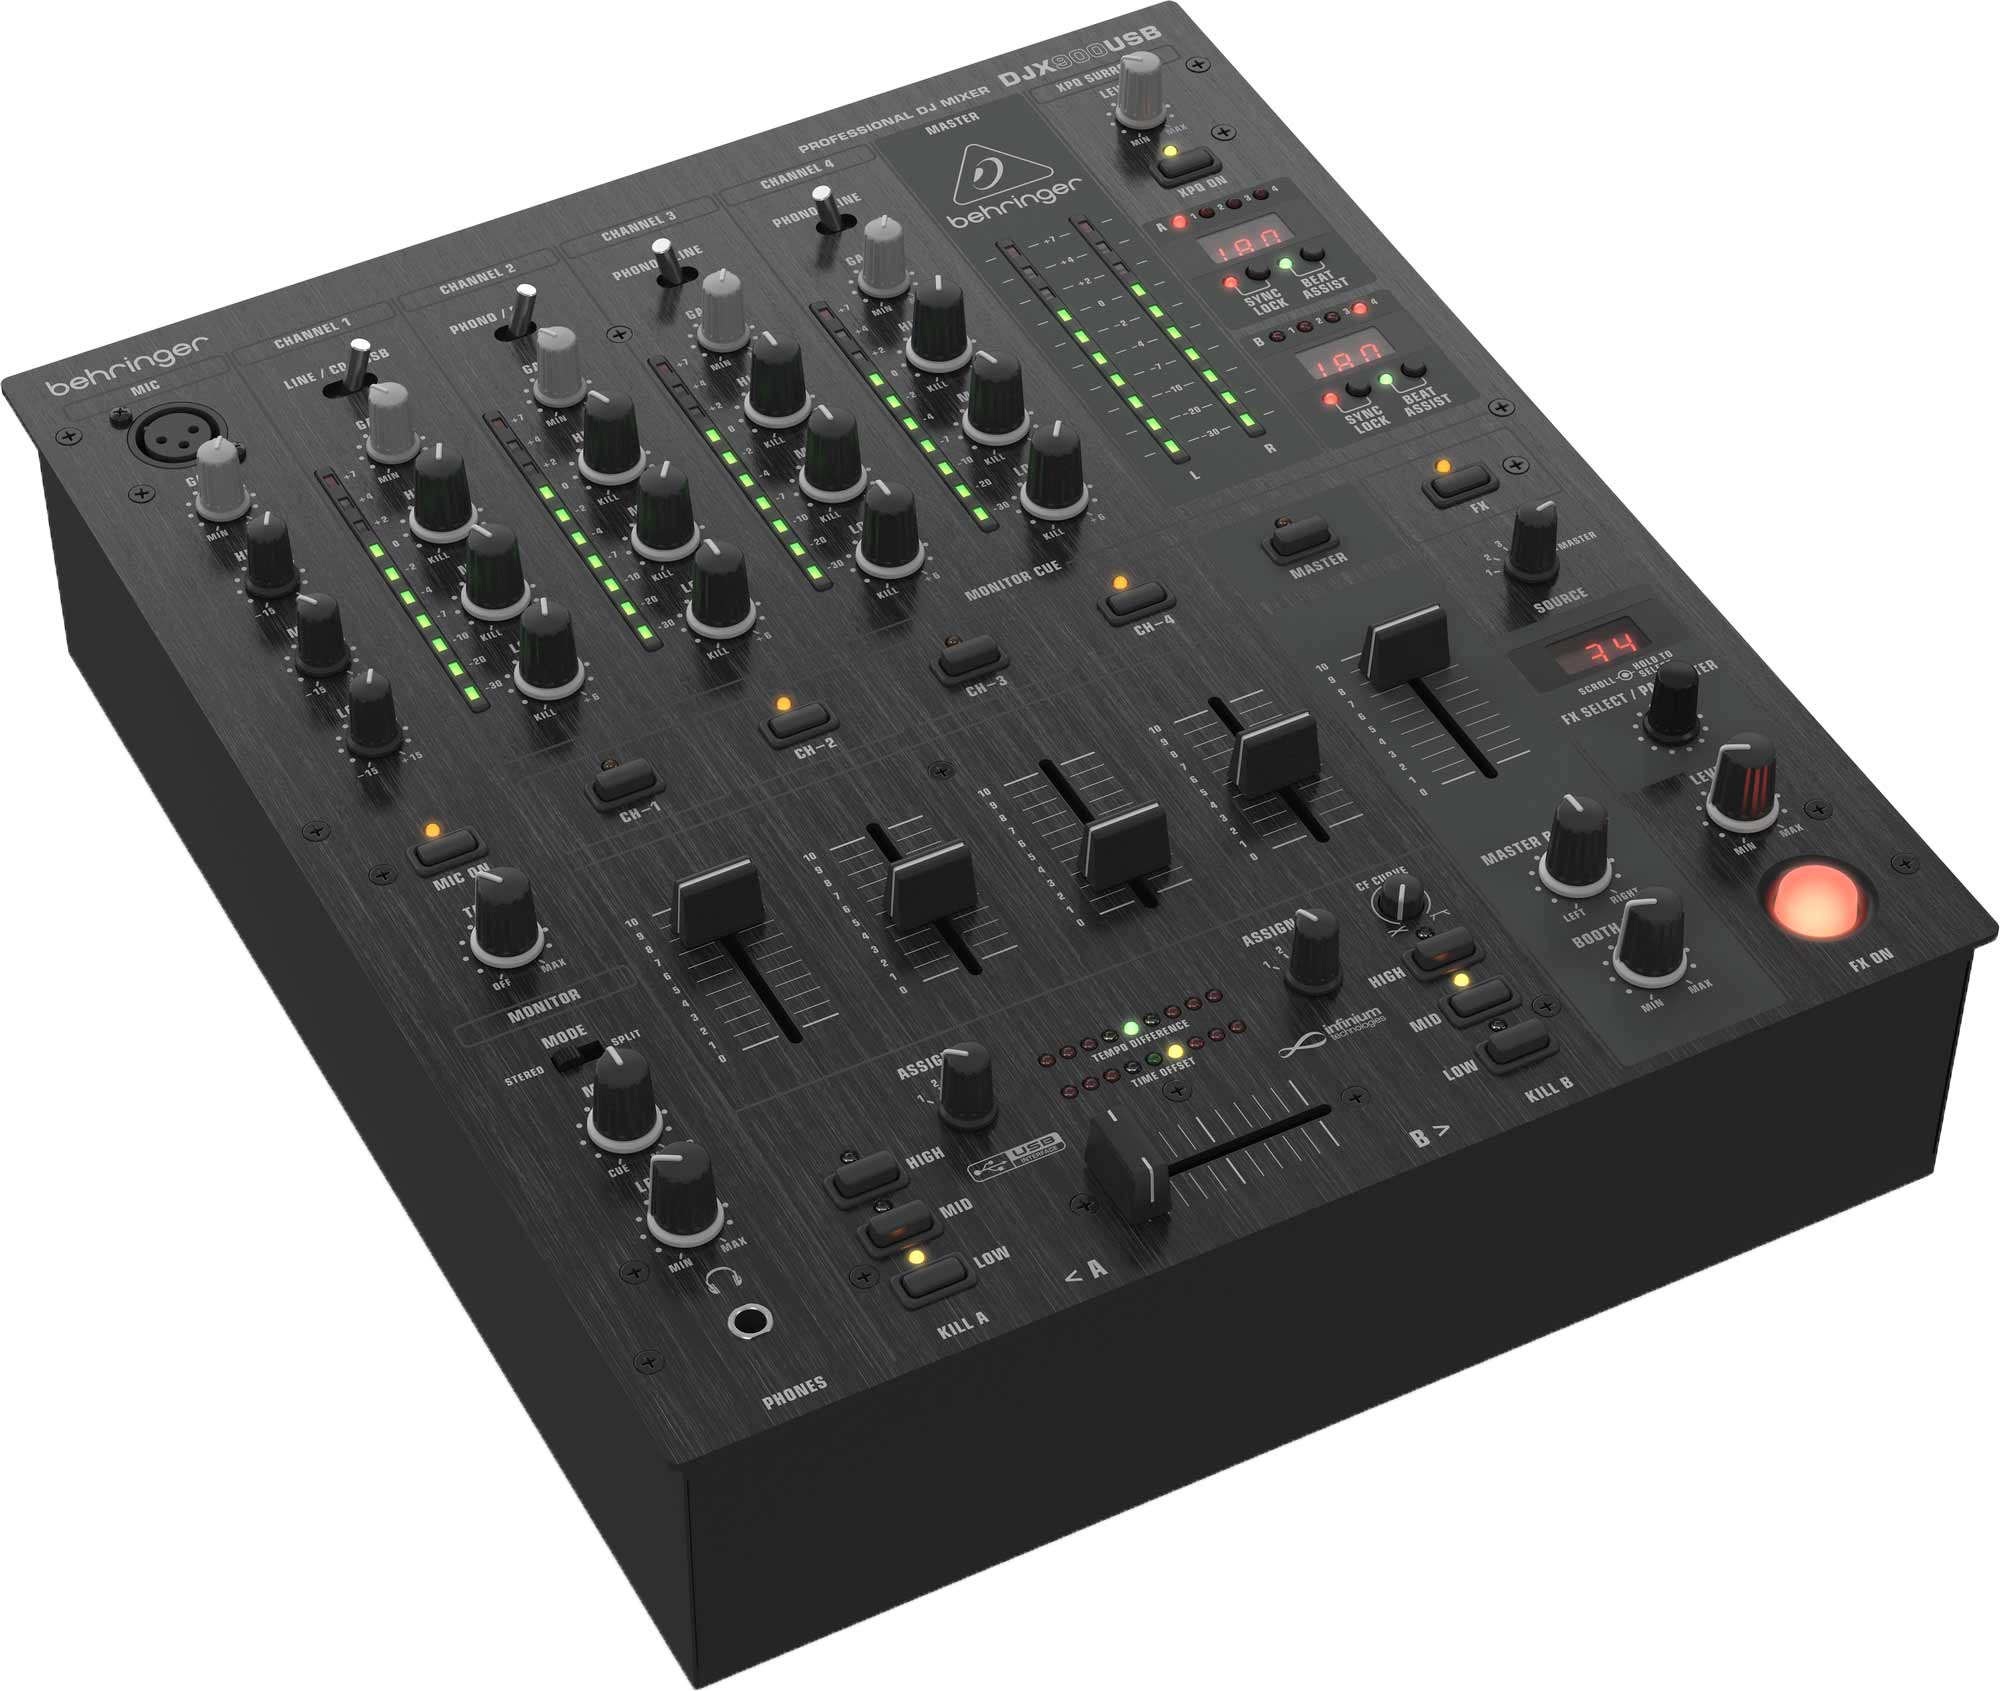 View larger image of Behringer Pro Mixer DJX900USB 5-Channel DJ Mixer